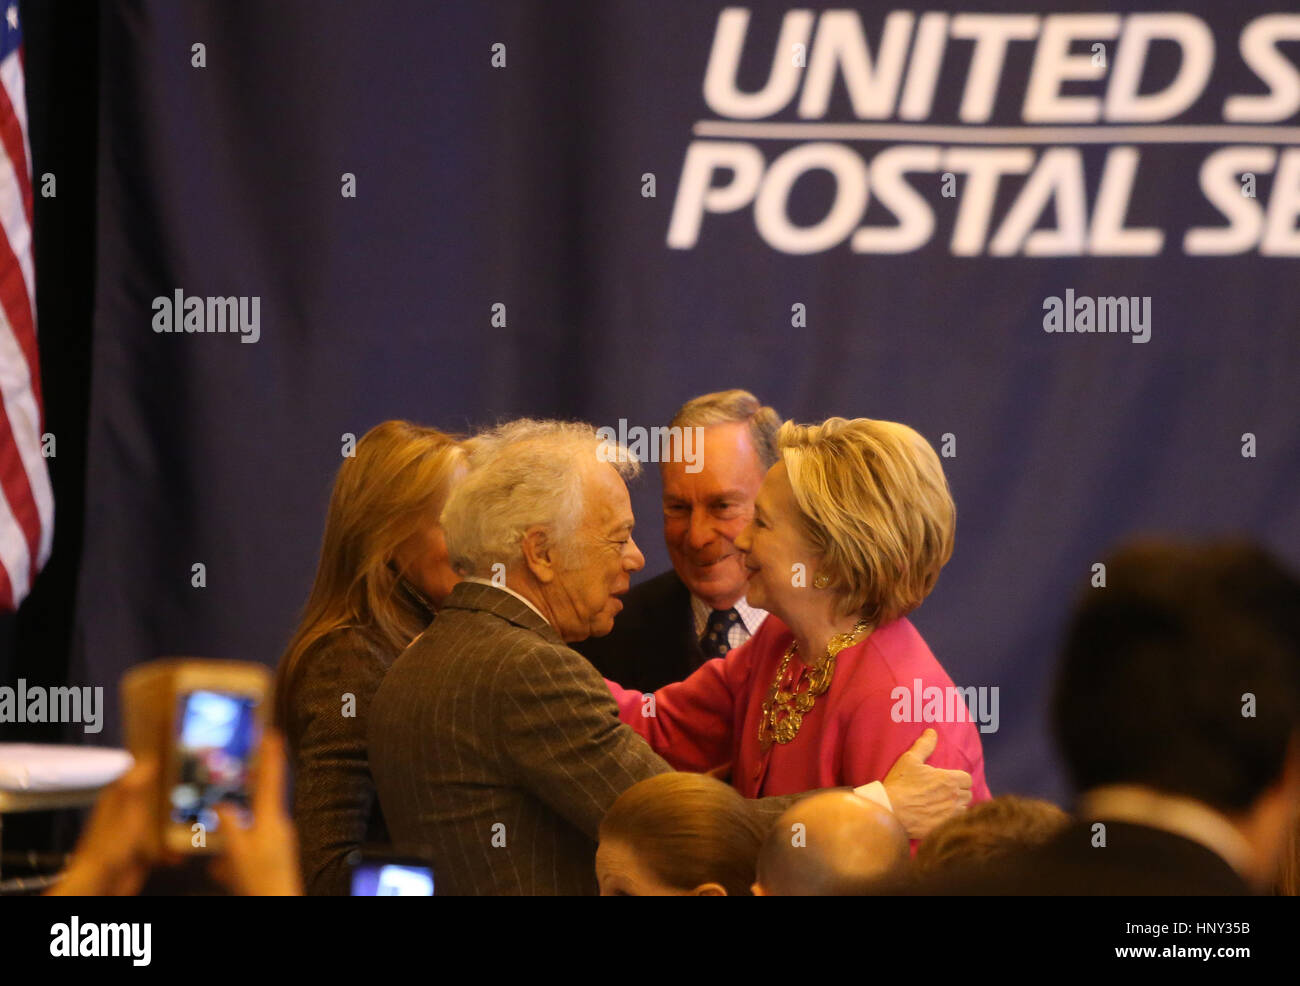 New York City, USA. 16th Feb, 2017. Hillary Clinton greets designer Ralph Lauren prior to unveiling ceremony. Former Secretary of State & Presidential candidate Hillary Clinton joined Vogue editor Anna Wintour, Anderson Cooper, Oscar de la Renta CEO Alexander Bolen & USPS VP Janice D. Walker in Grand Central Terminal's Vanderbilt Hall to formally unveil a USPS postage stamp honoring fashion designer Oscar de la Renta. Credit: Andy Katz/Pacific Press/Alamy Live News Stock Photo